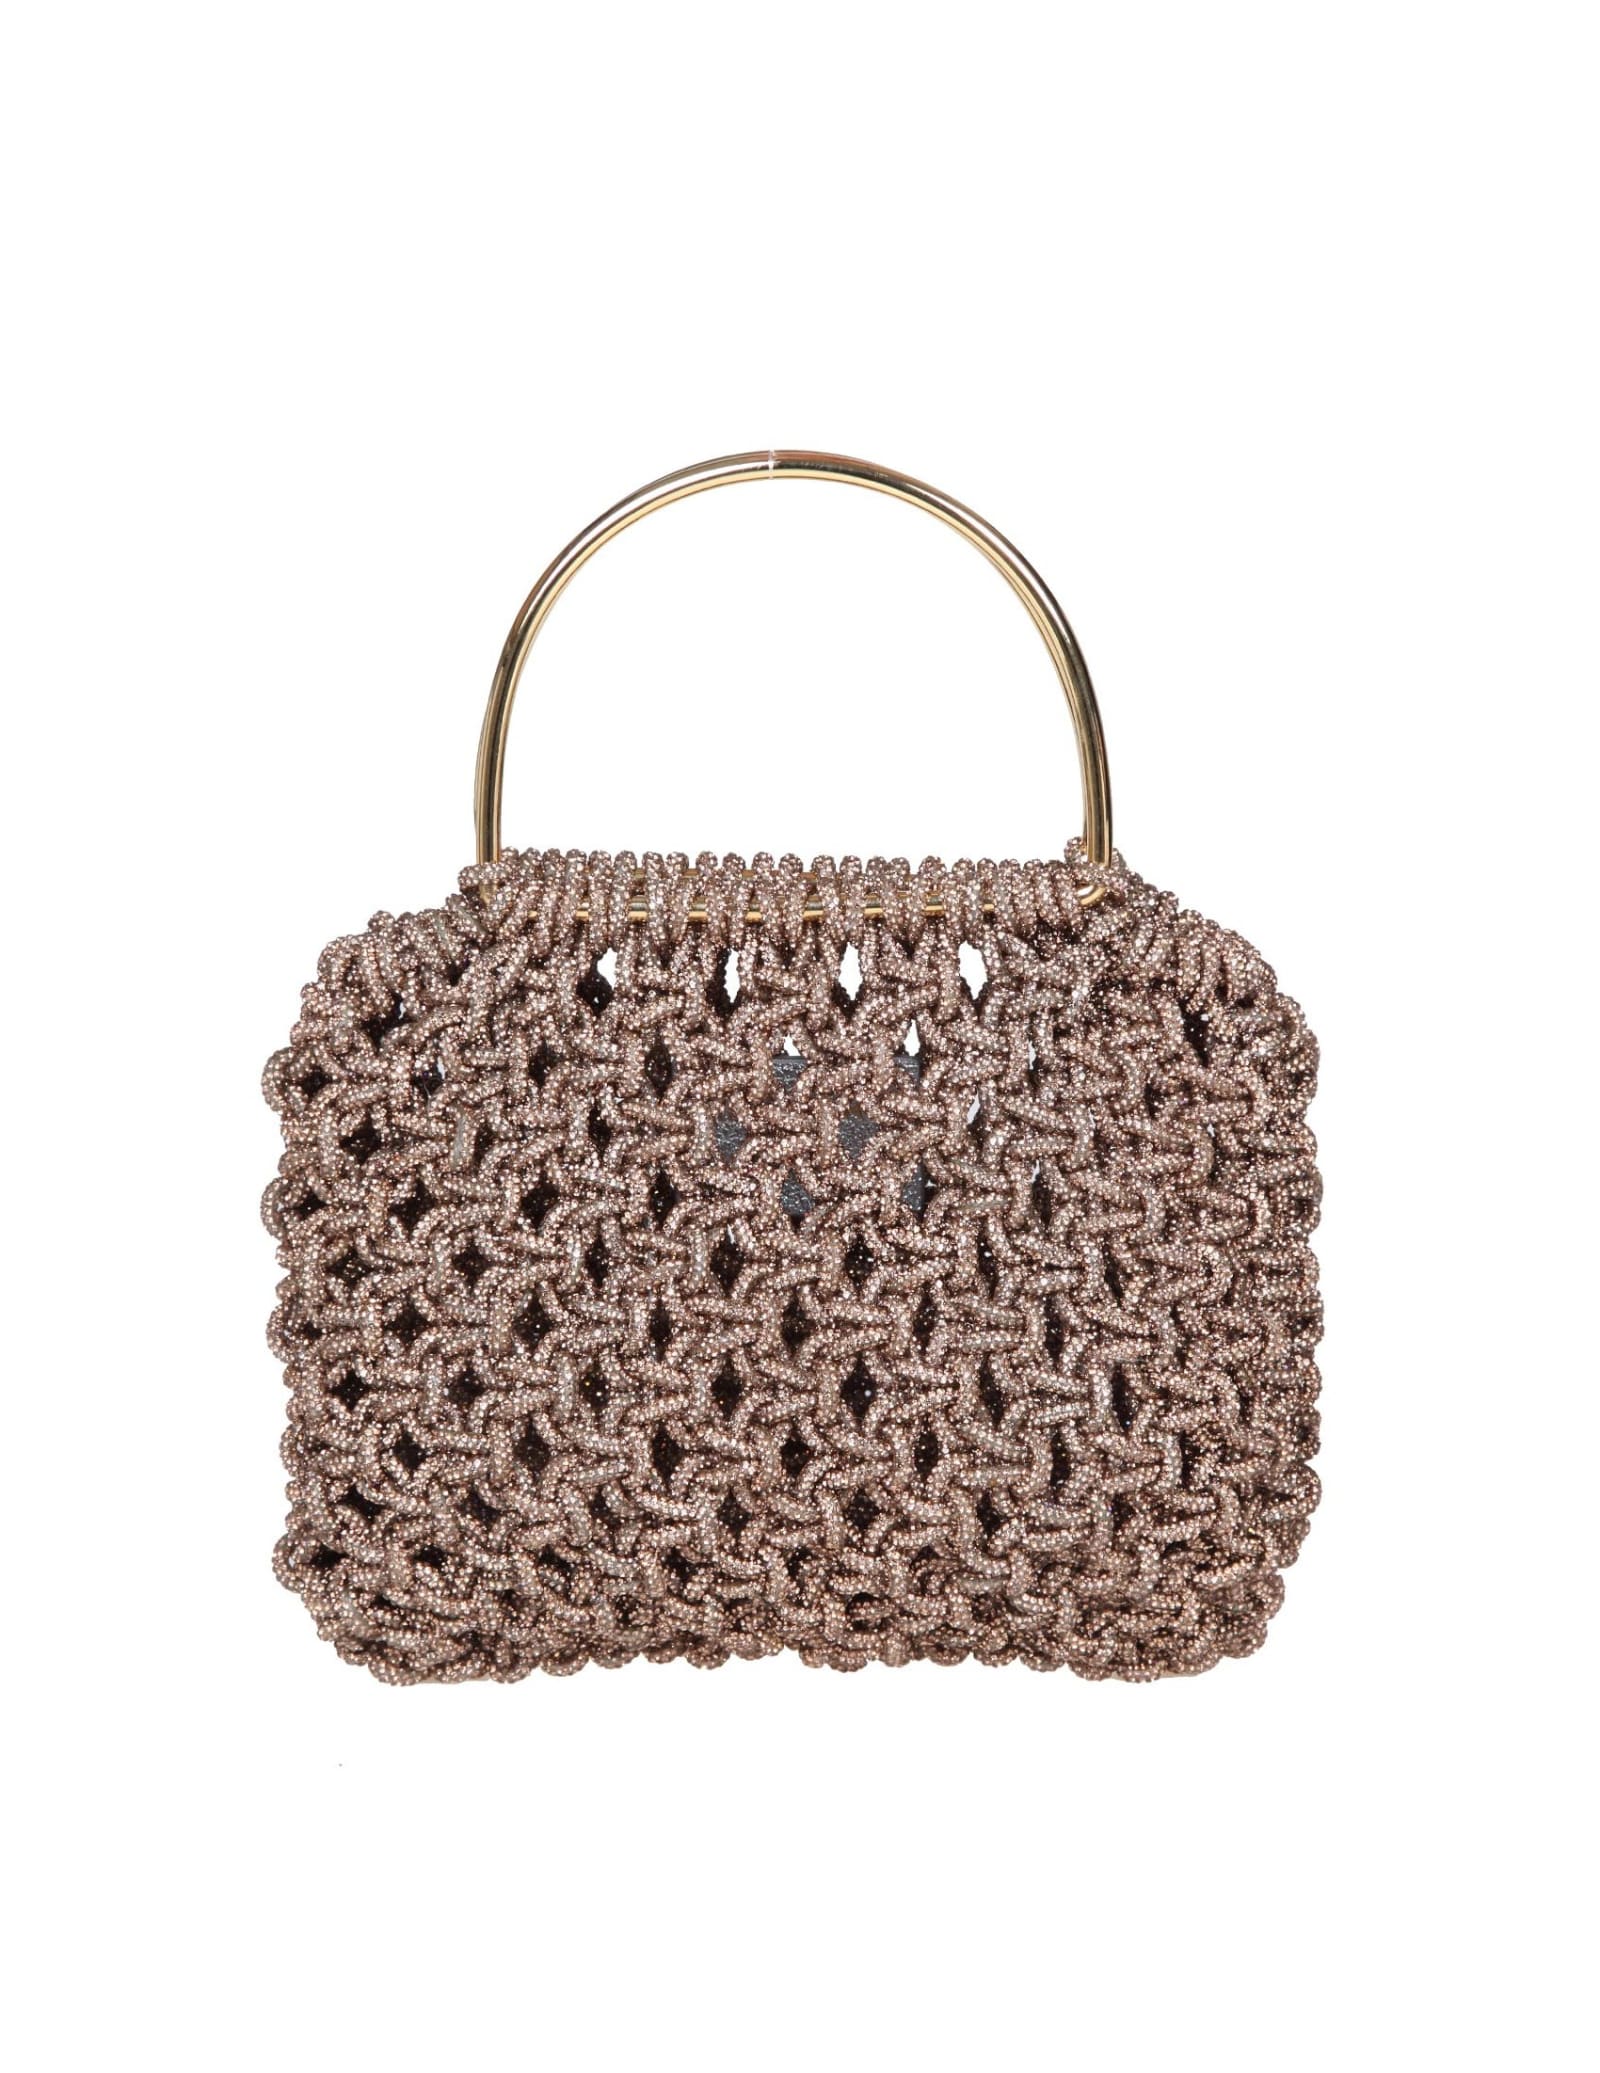 Jewelry Handbag Woven With Crystals